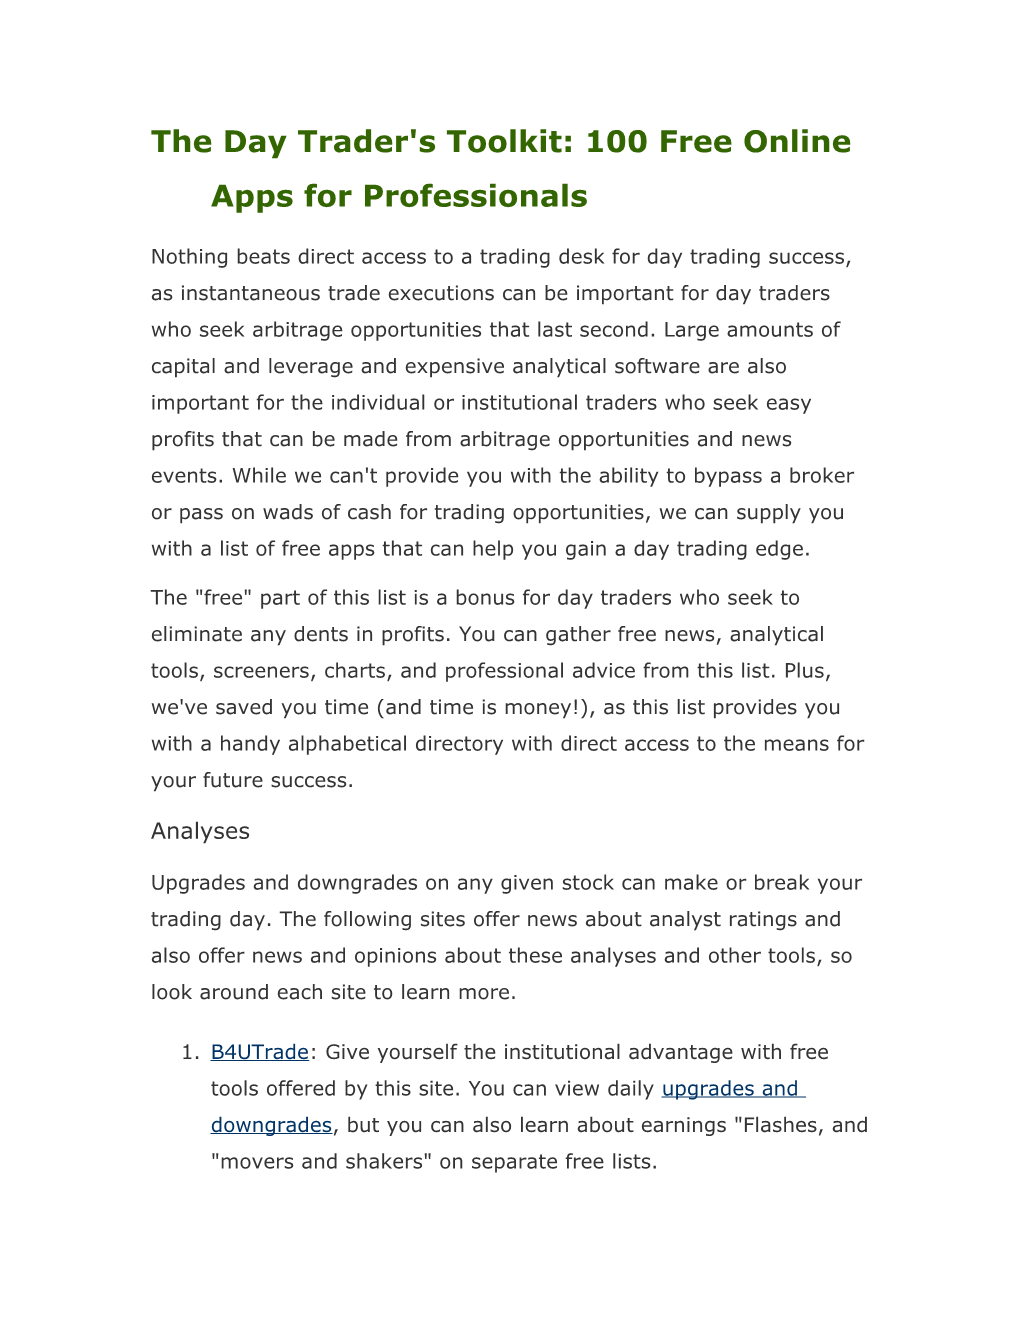 The Day Trader's Toolkit: 100 Free Online Apps for Professionals